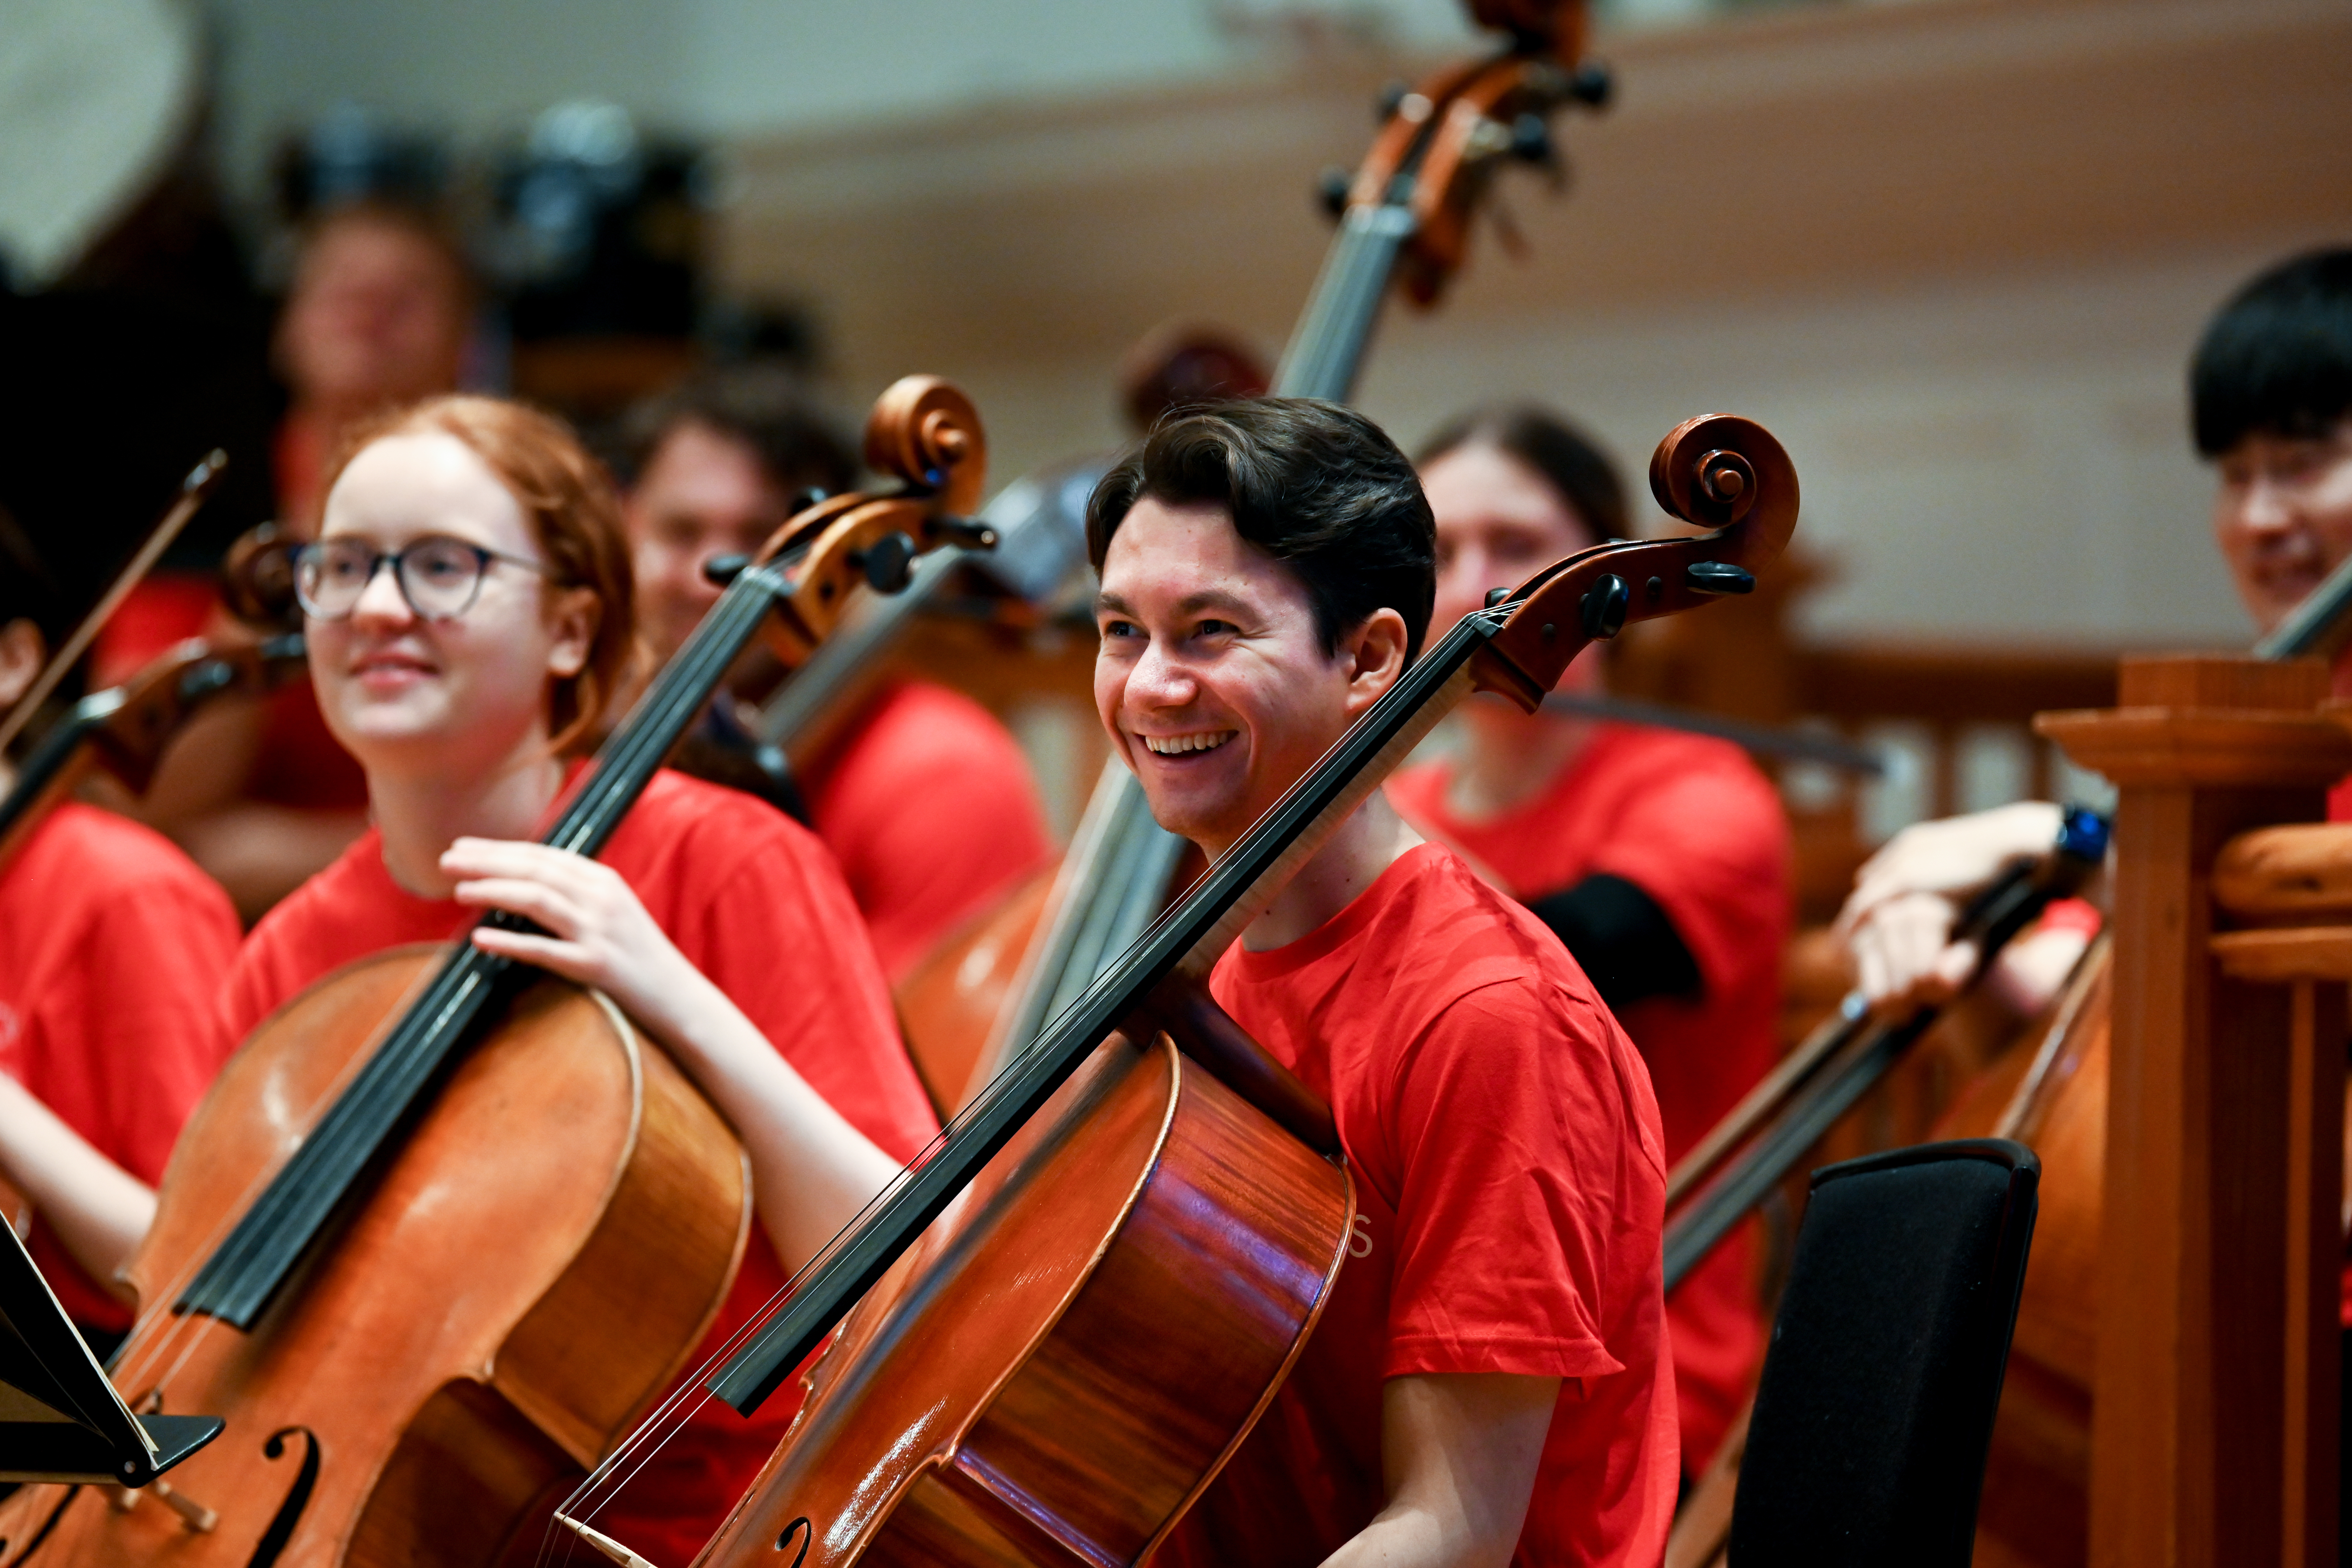 Two cellists wearing red and smiling